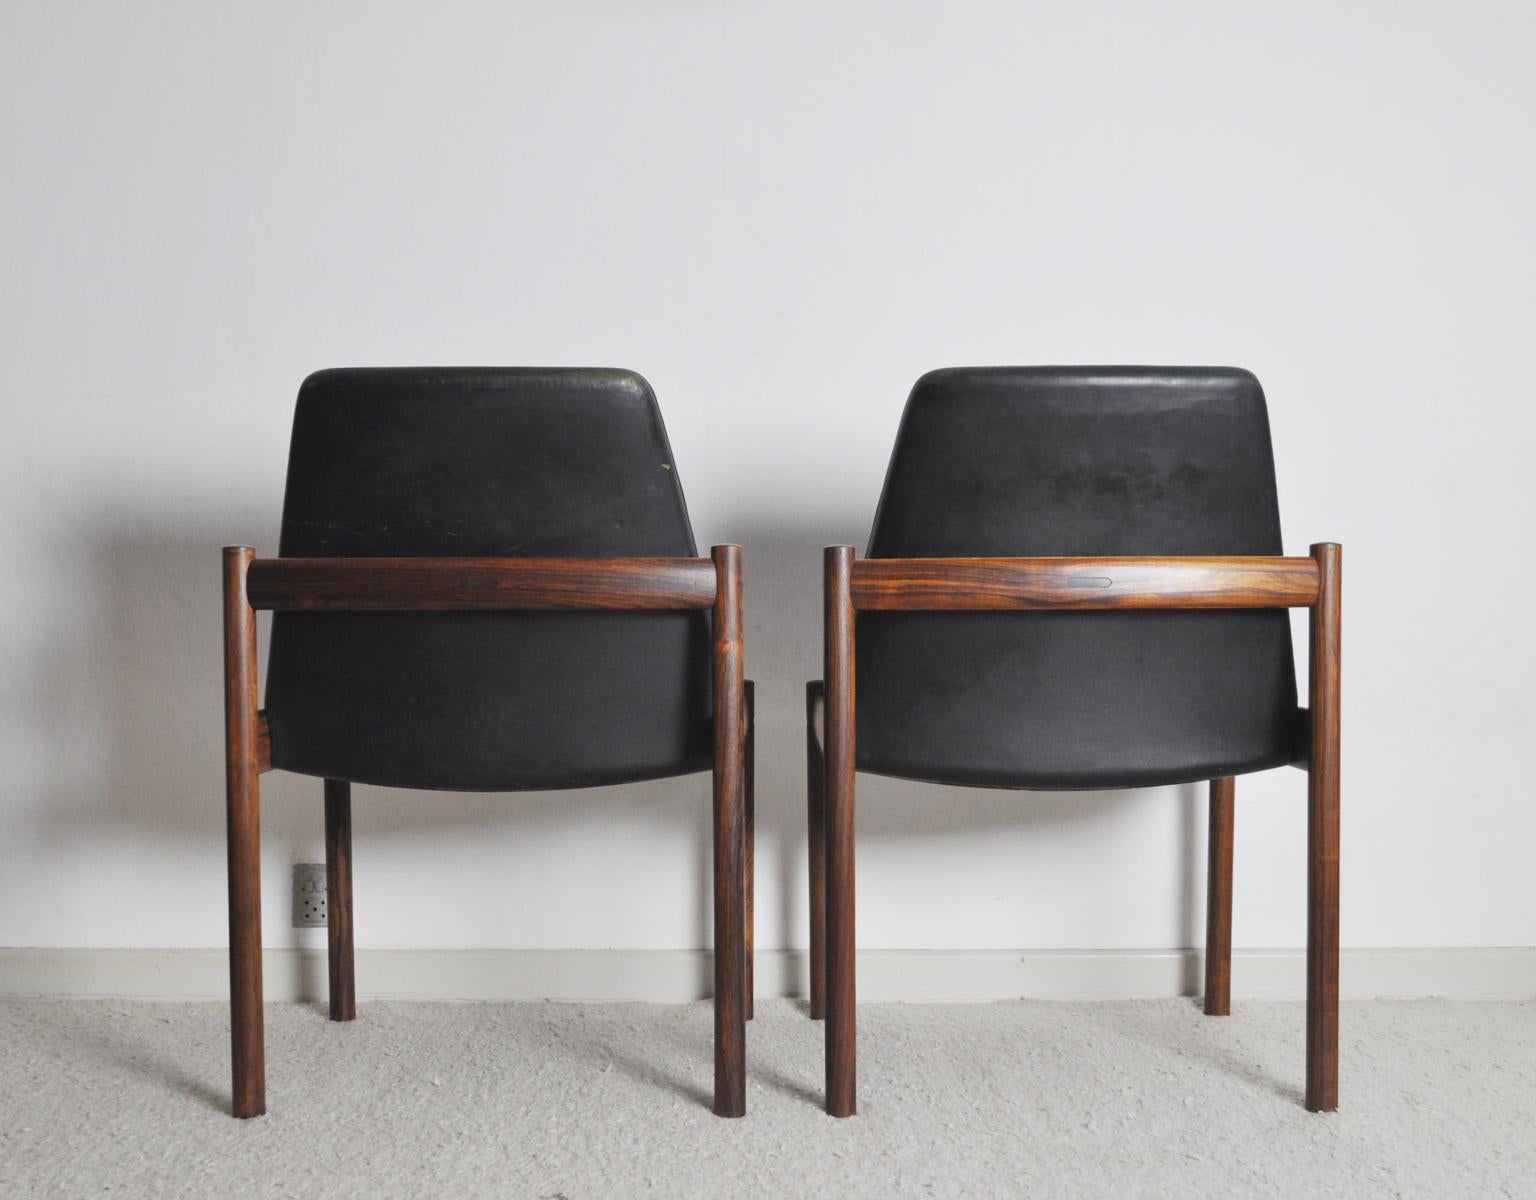 Mid-20th Century Rosewood and Leather Dining Chair by Sven Ivar Dysthe for Dokka Møbler For Sale